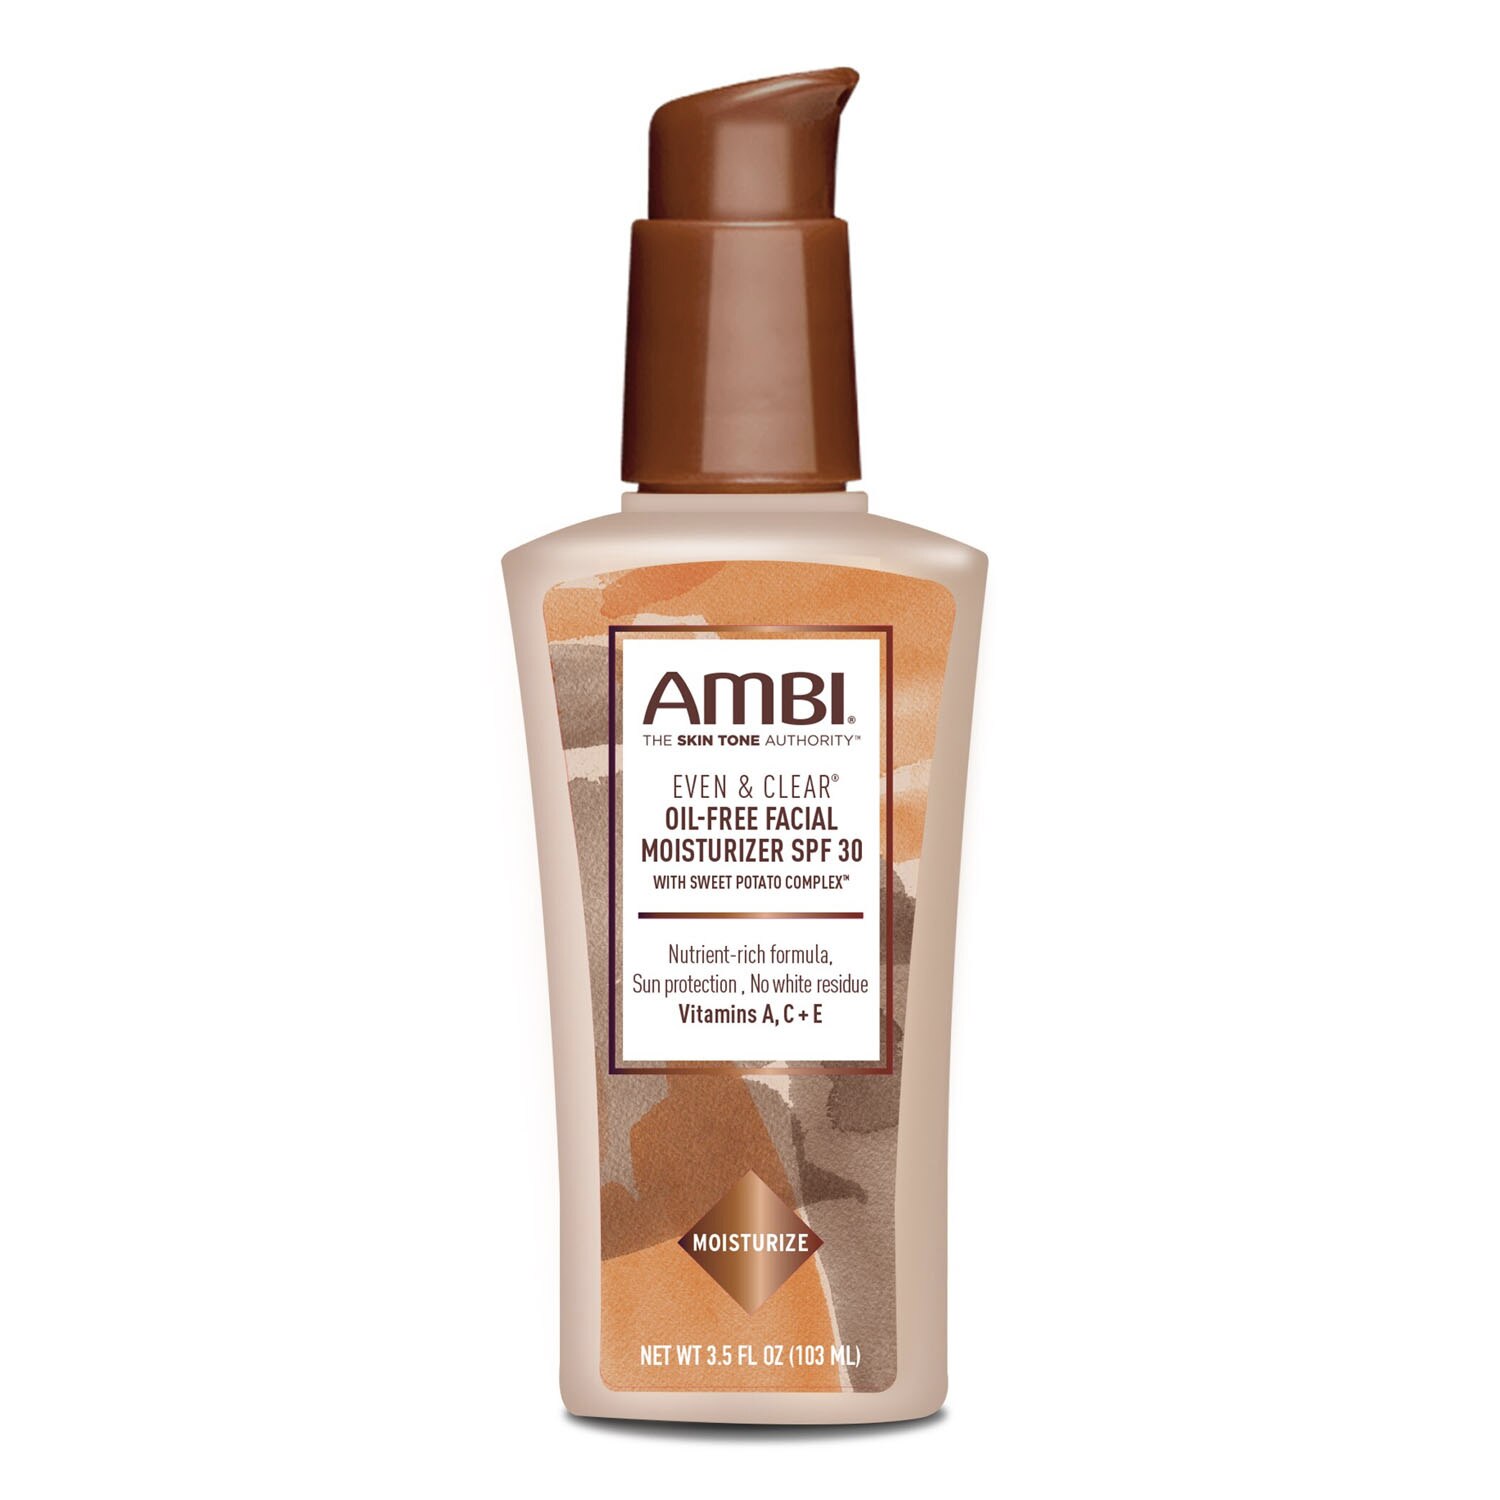 Ambi Even & Clear Oil-free Facial Moisturizer with SPF 30, 3.5 OZ